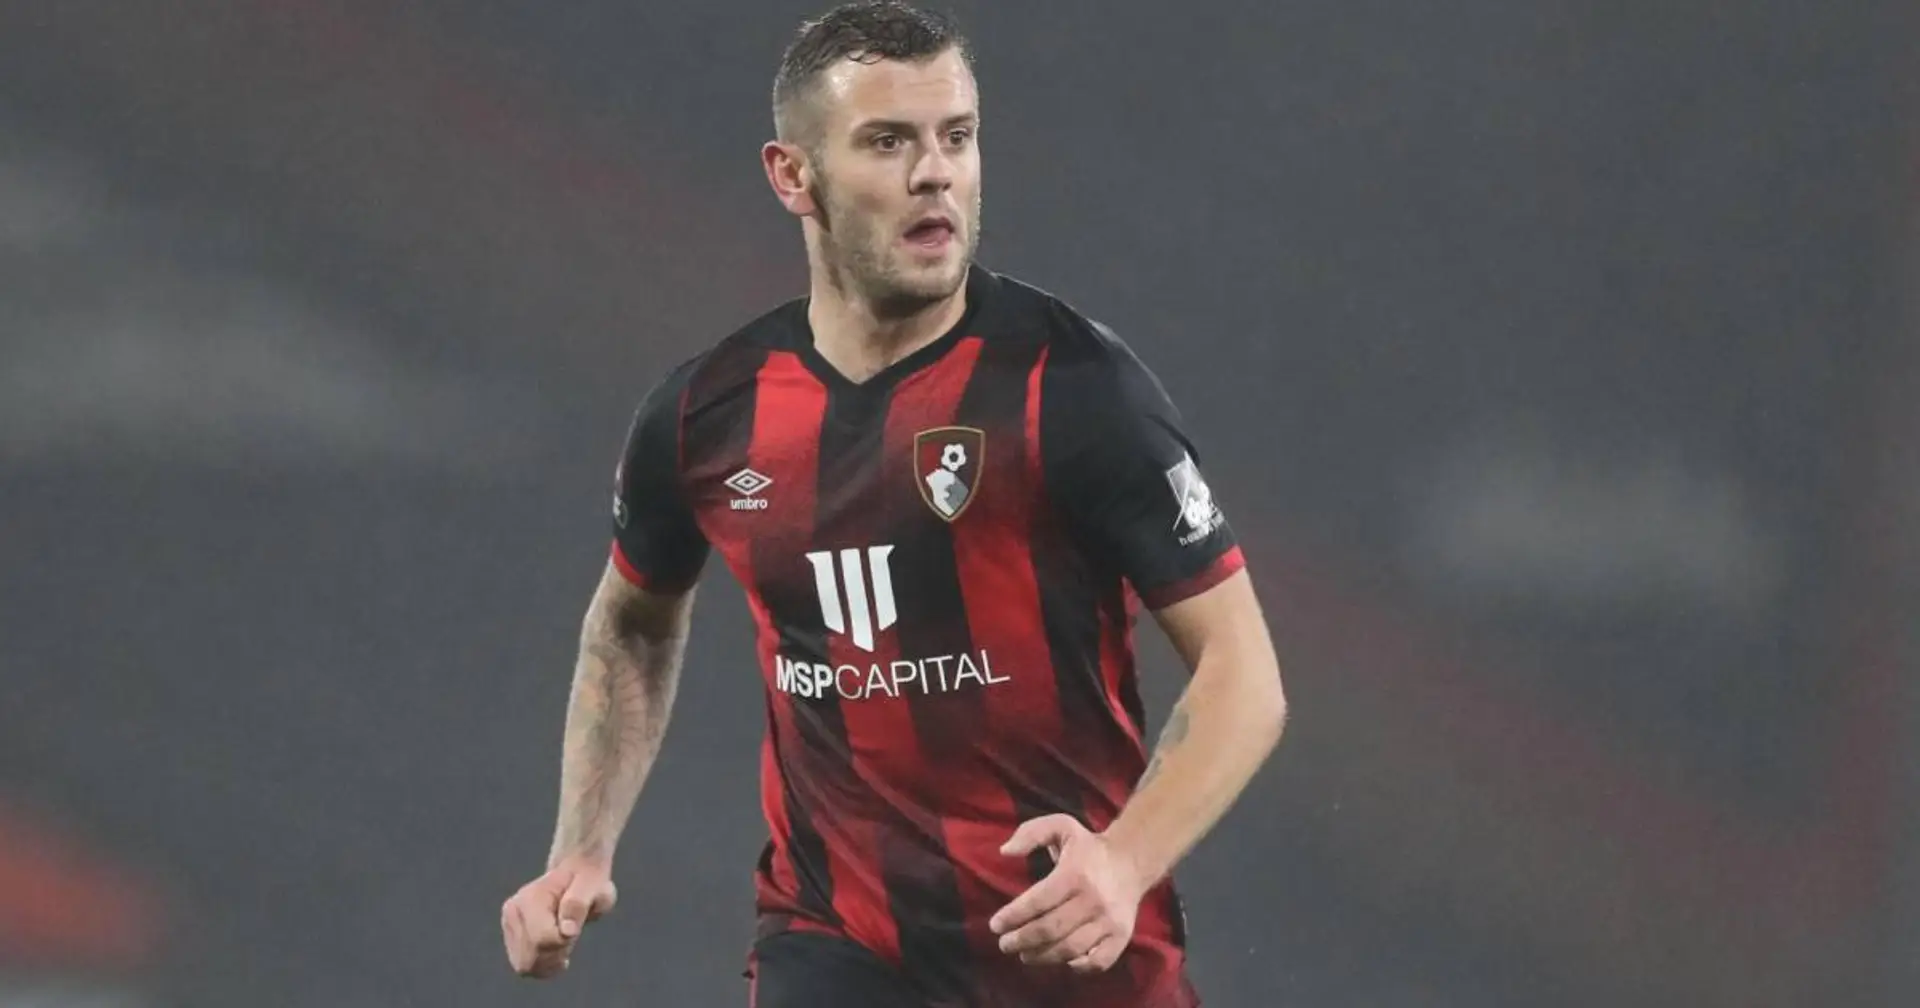 Jack Wilshere scores on his first game back for Bournemouth, helps Cherries progress in FA Cup (video)